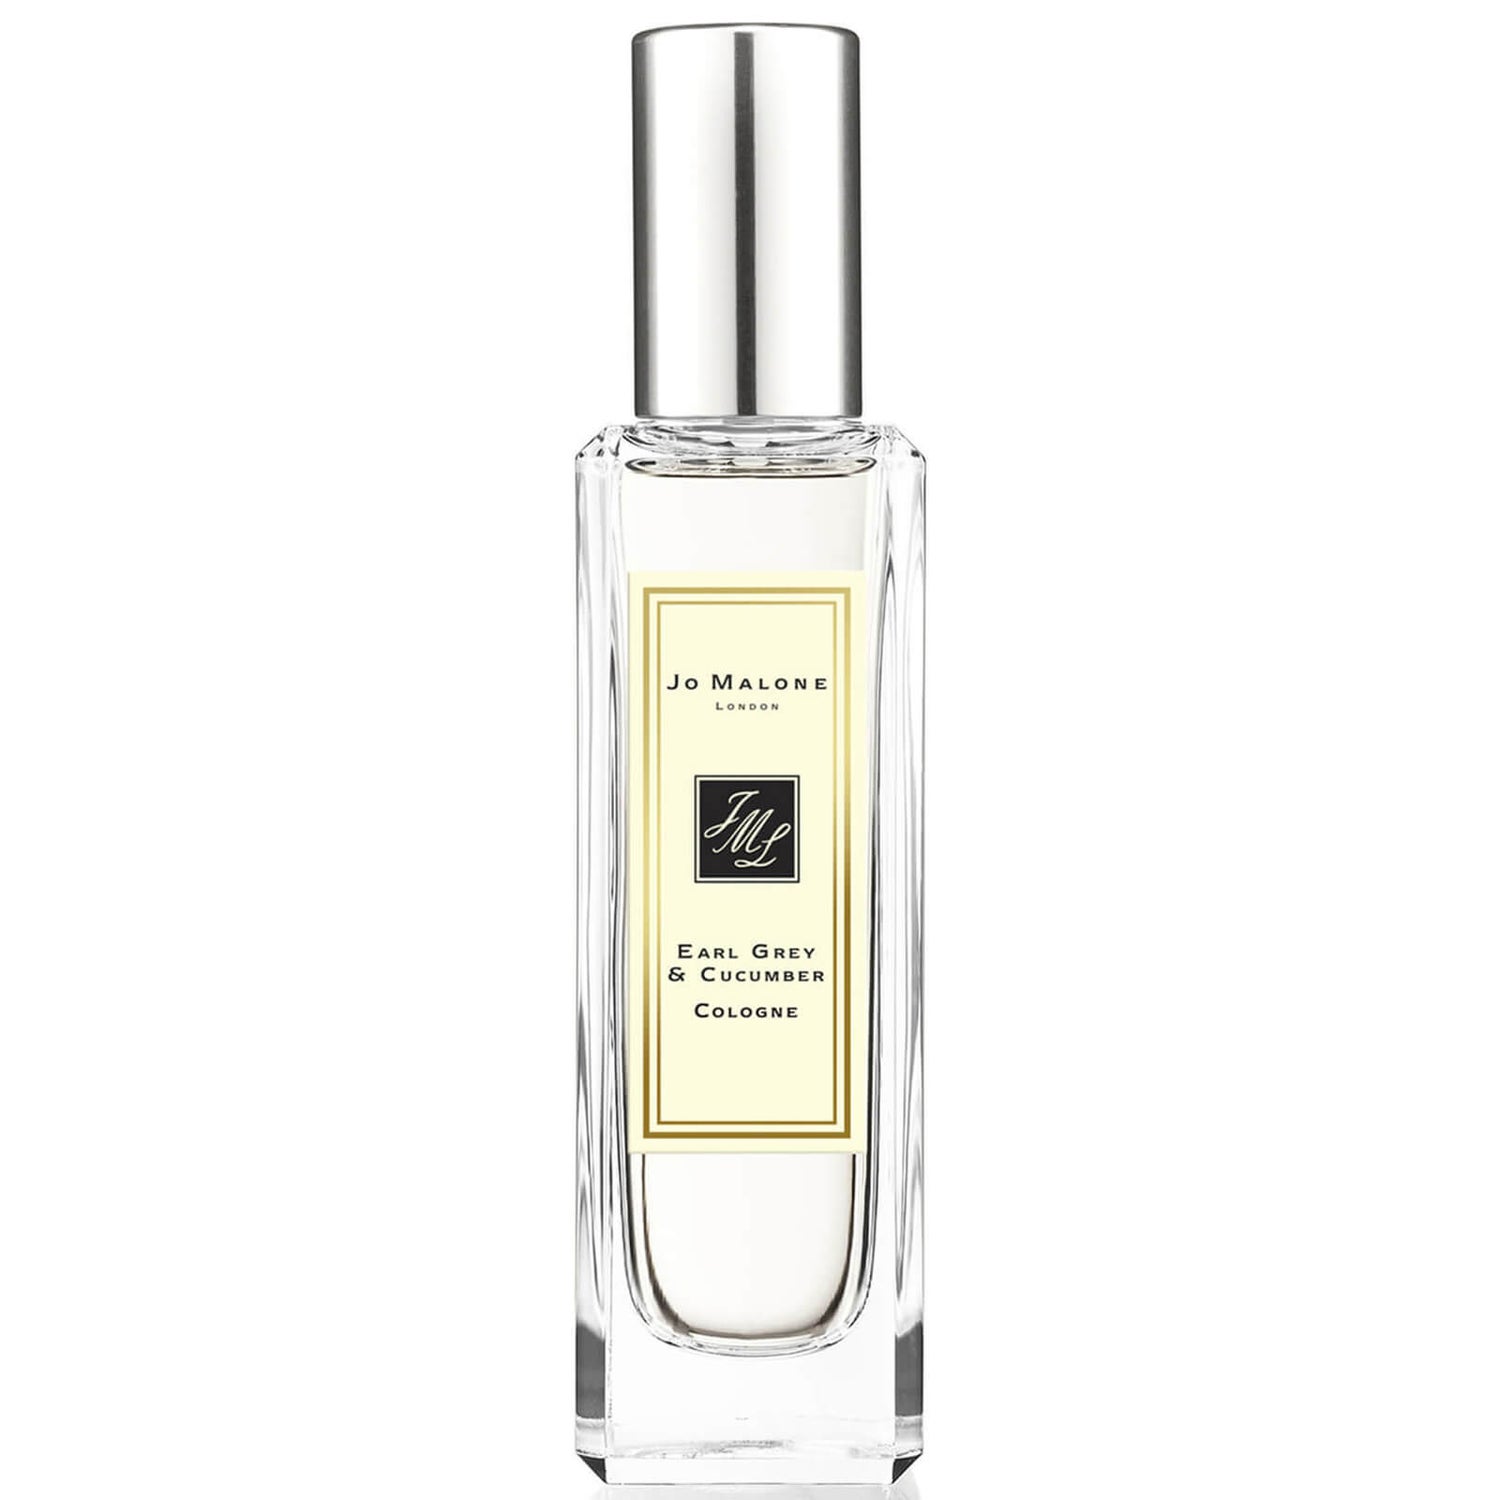 Jo Malone London Earl Grey and Cucumber Cologne - 30ml